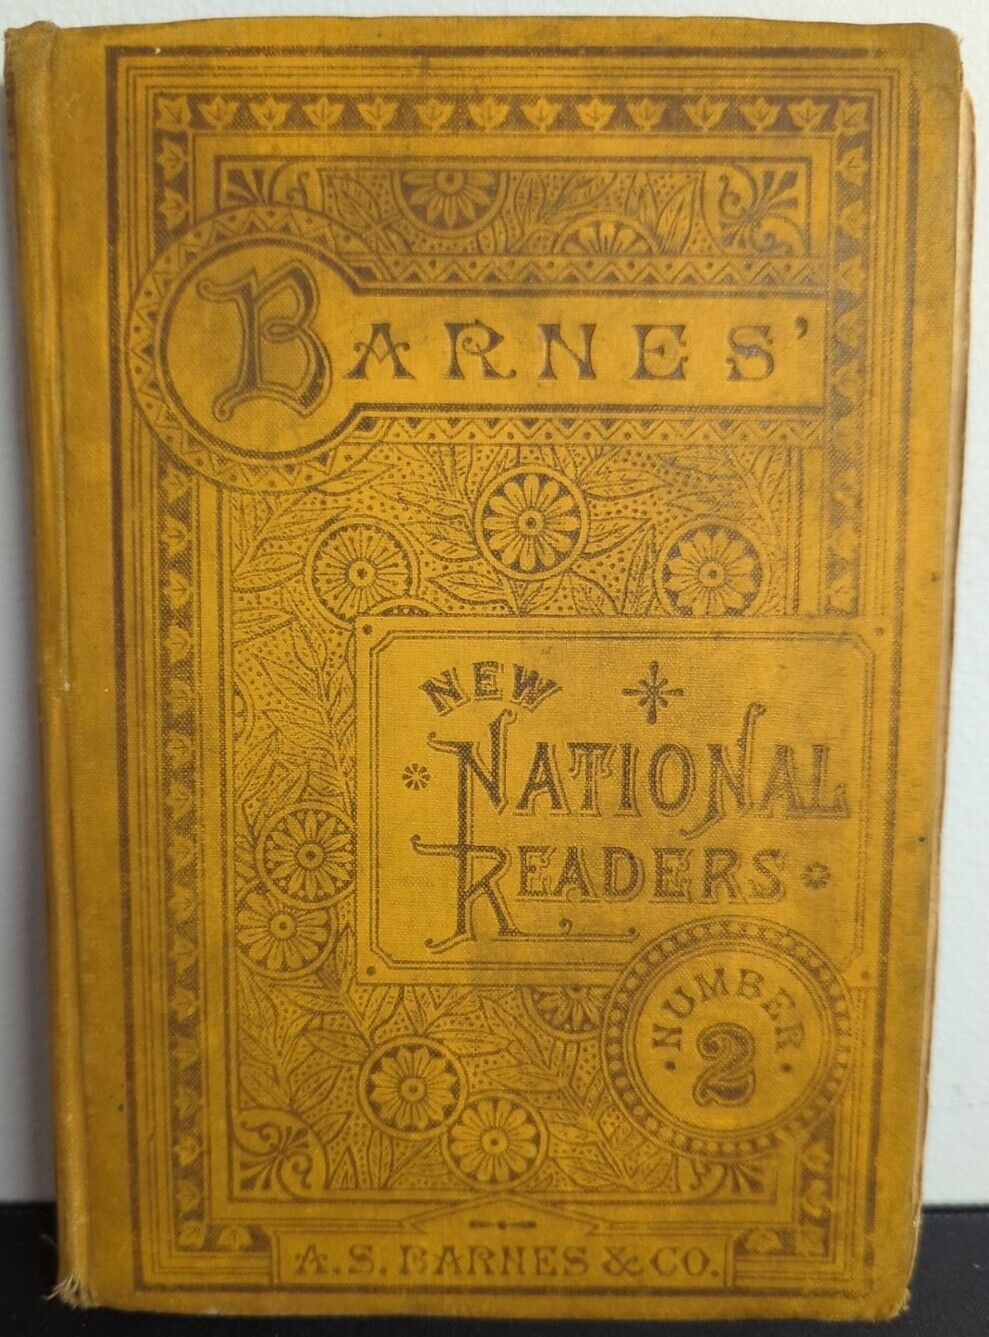 Barnes New National Readers - 1882 -  Number 2 - Antique Book - Hardcover